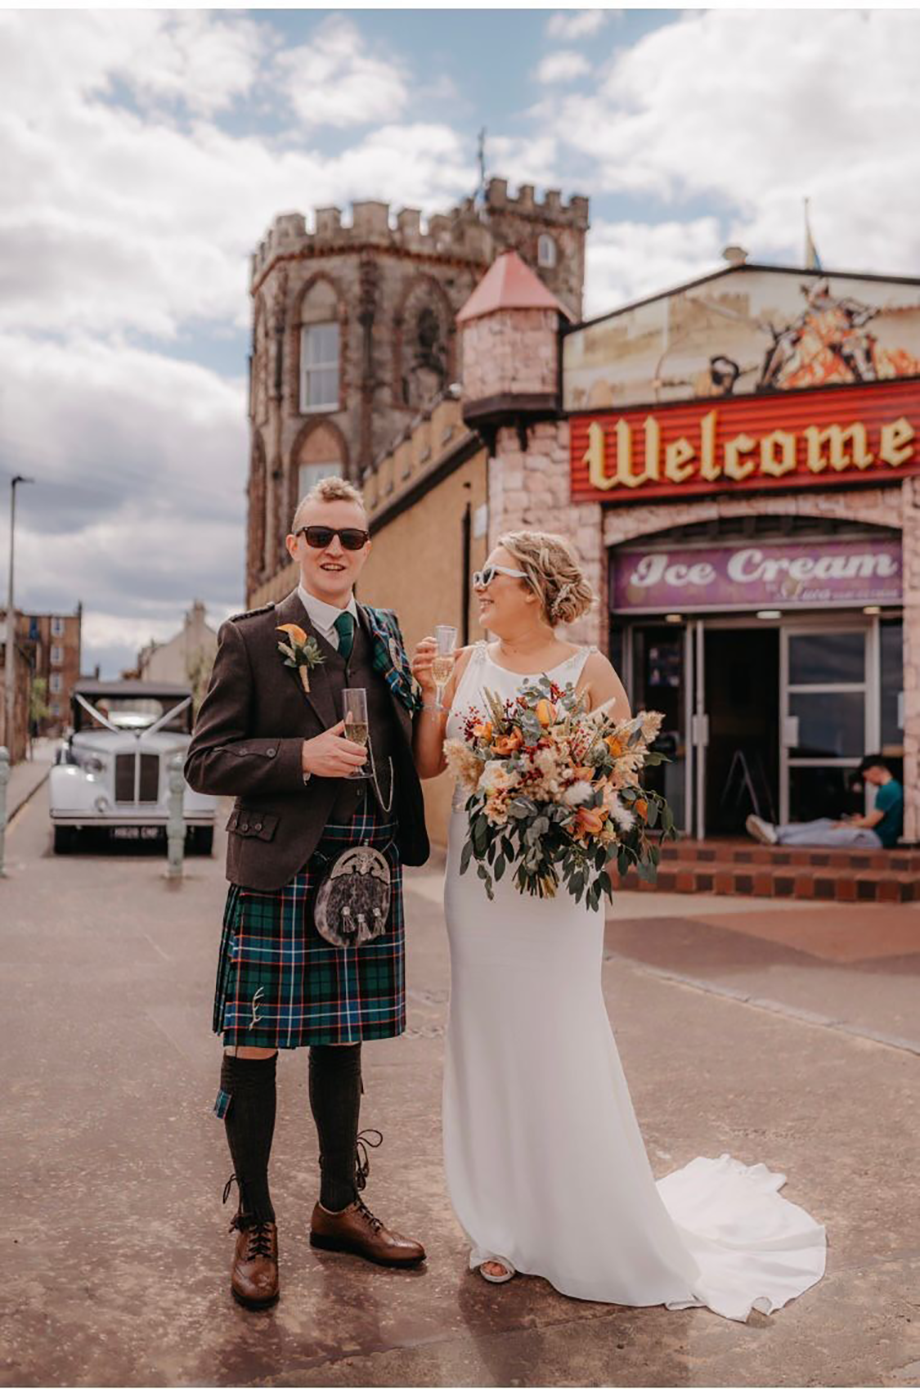 A man in a kilt and a woman in a wedding dress. They are both holding glasses of champagne